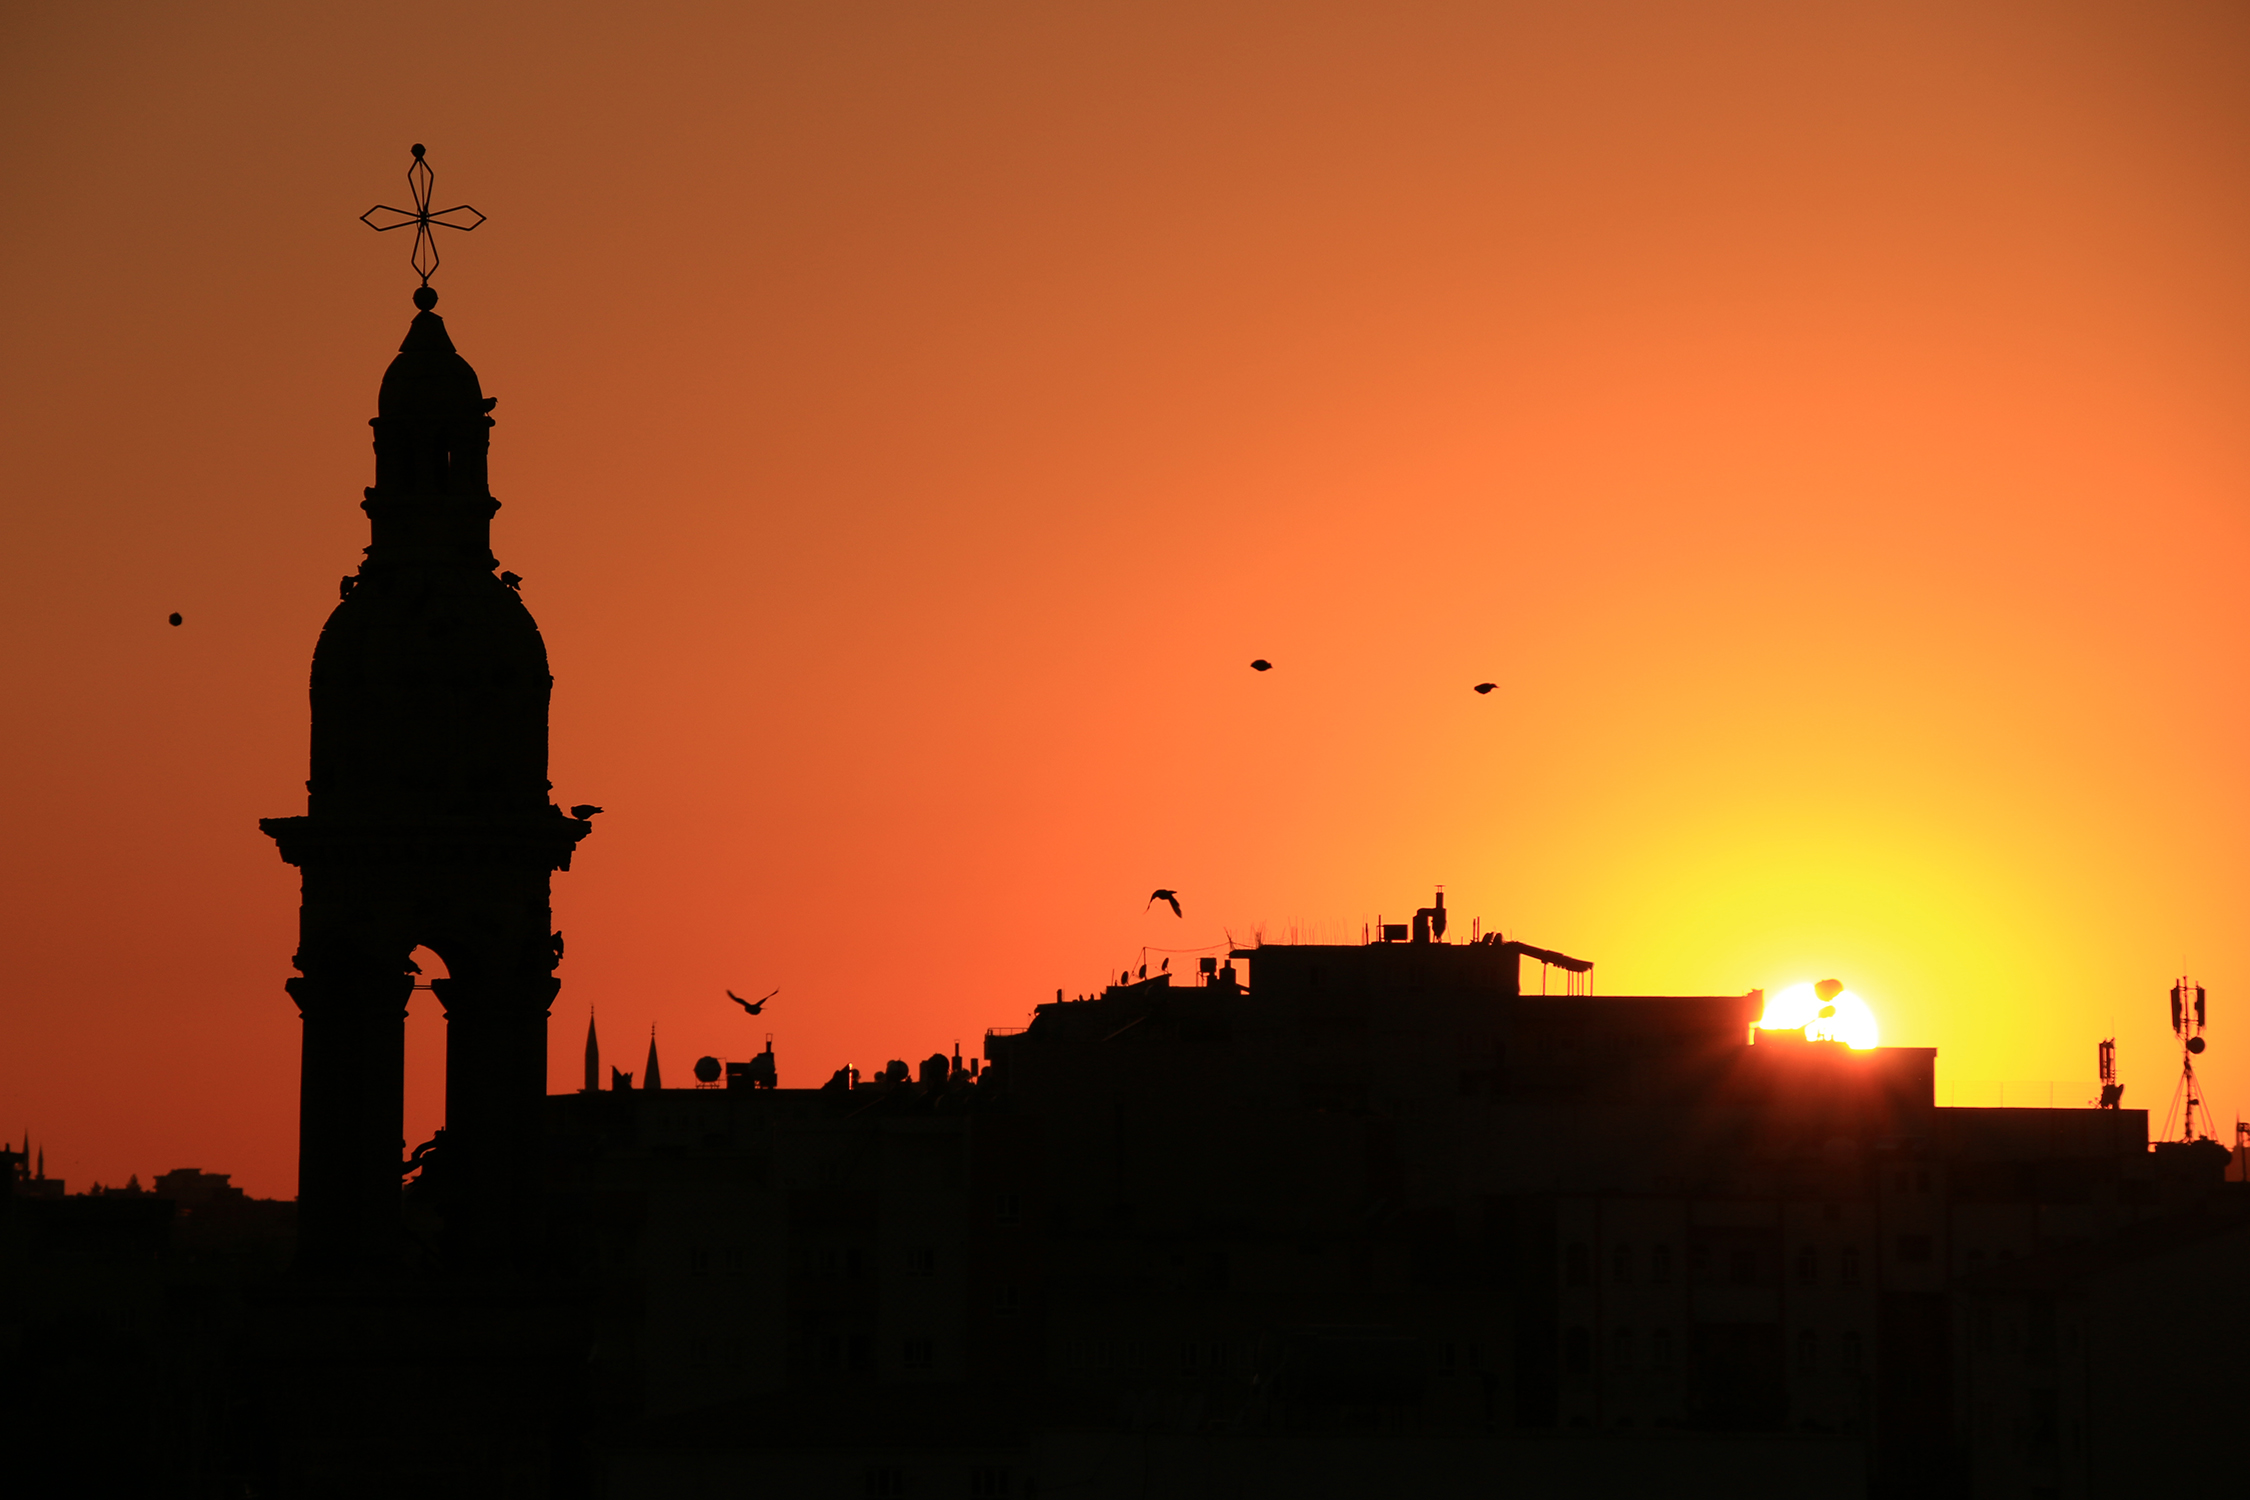 Bell tower of a church with birds flying overhead and the sun blazing on the horizon in the background